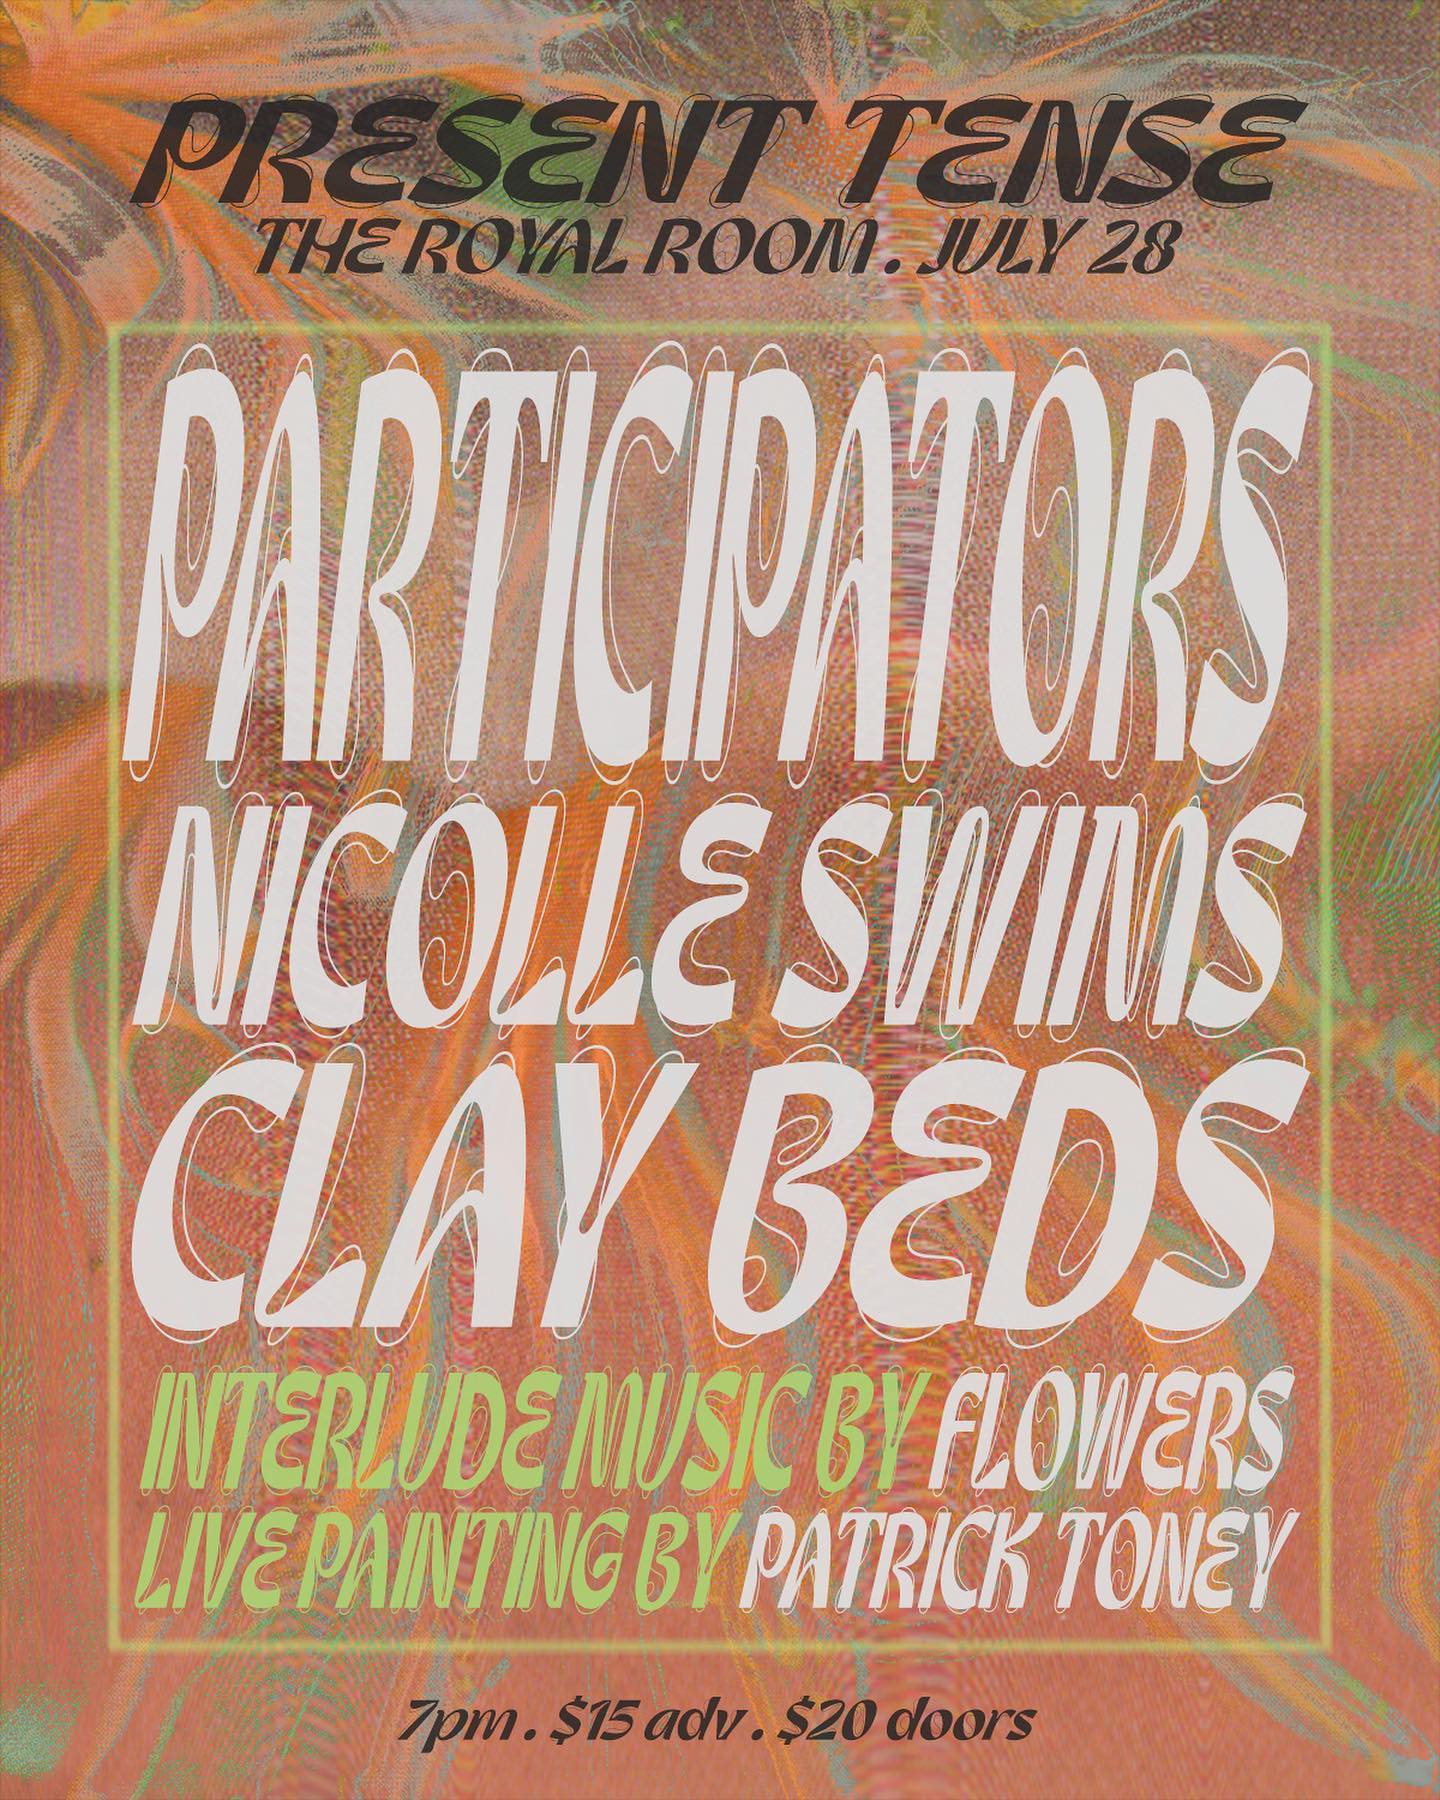 07/28/2022, Seattle, The Royal Room